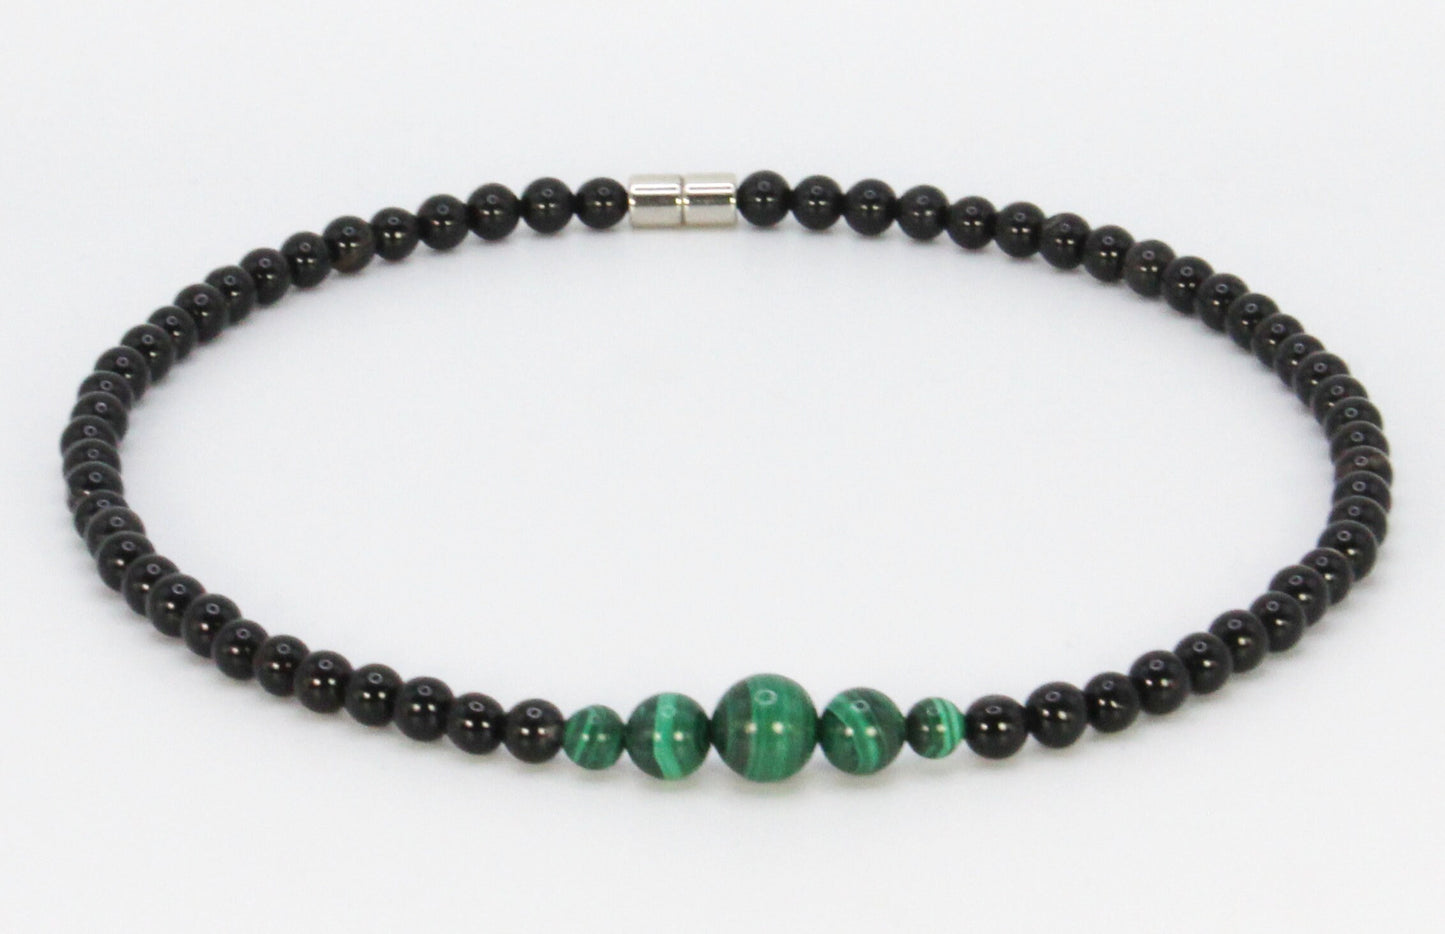 Onyx and Malachite Necklace for Men/Women Genuine Malachite Jewelry with easy lock magnet clasp